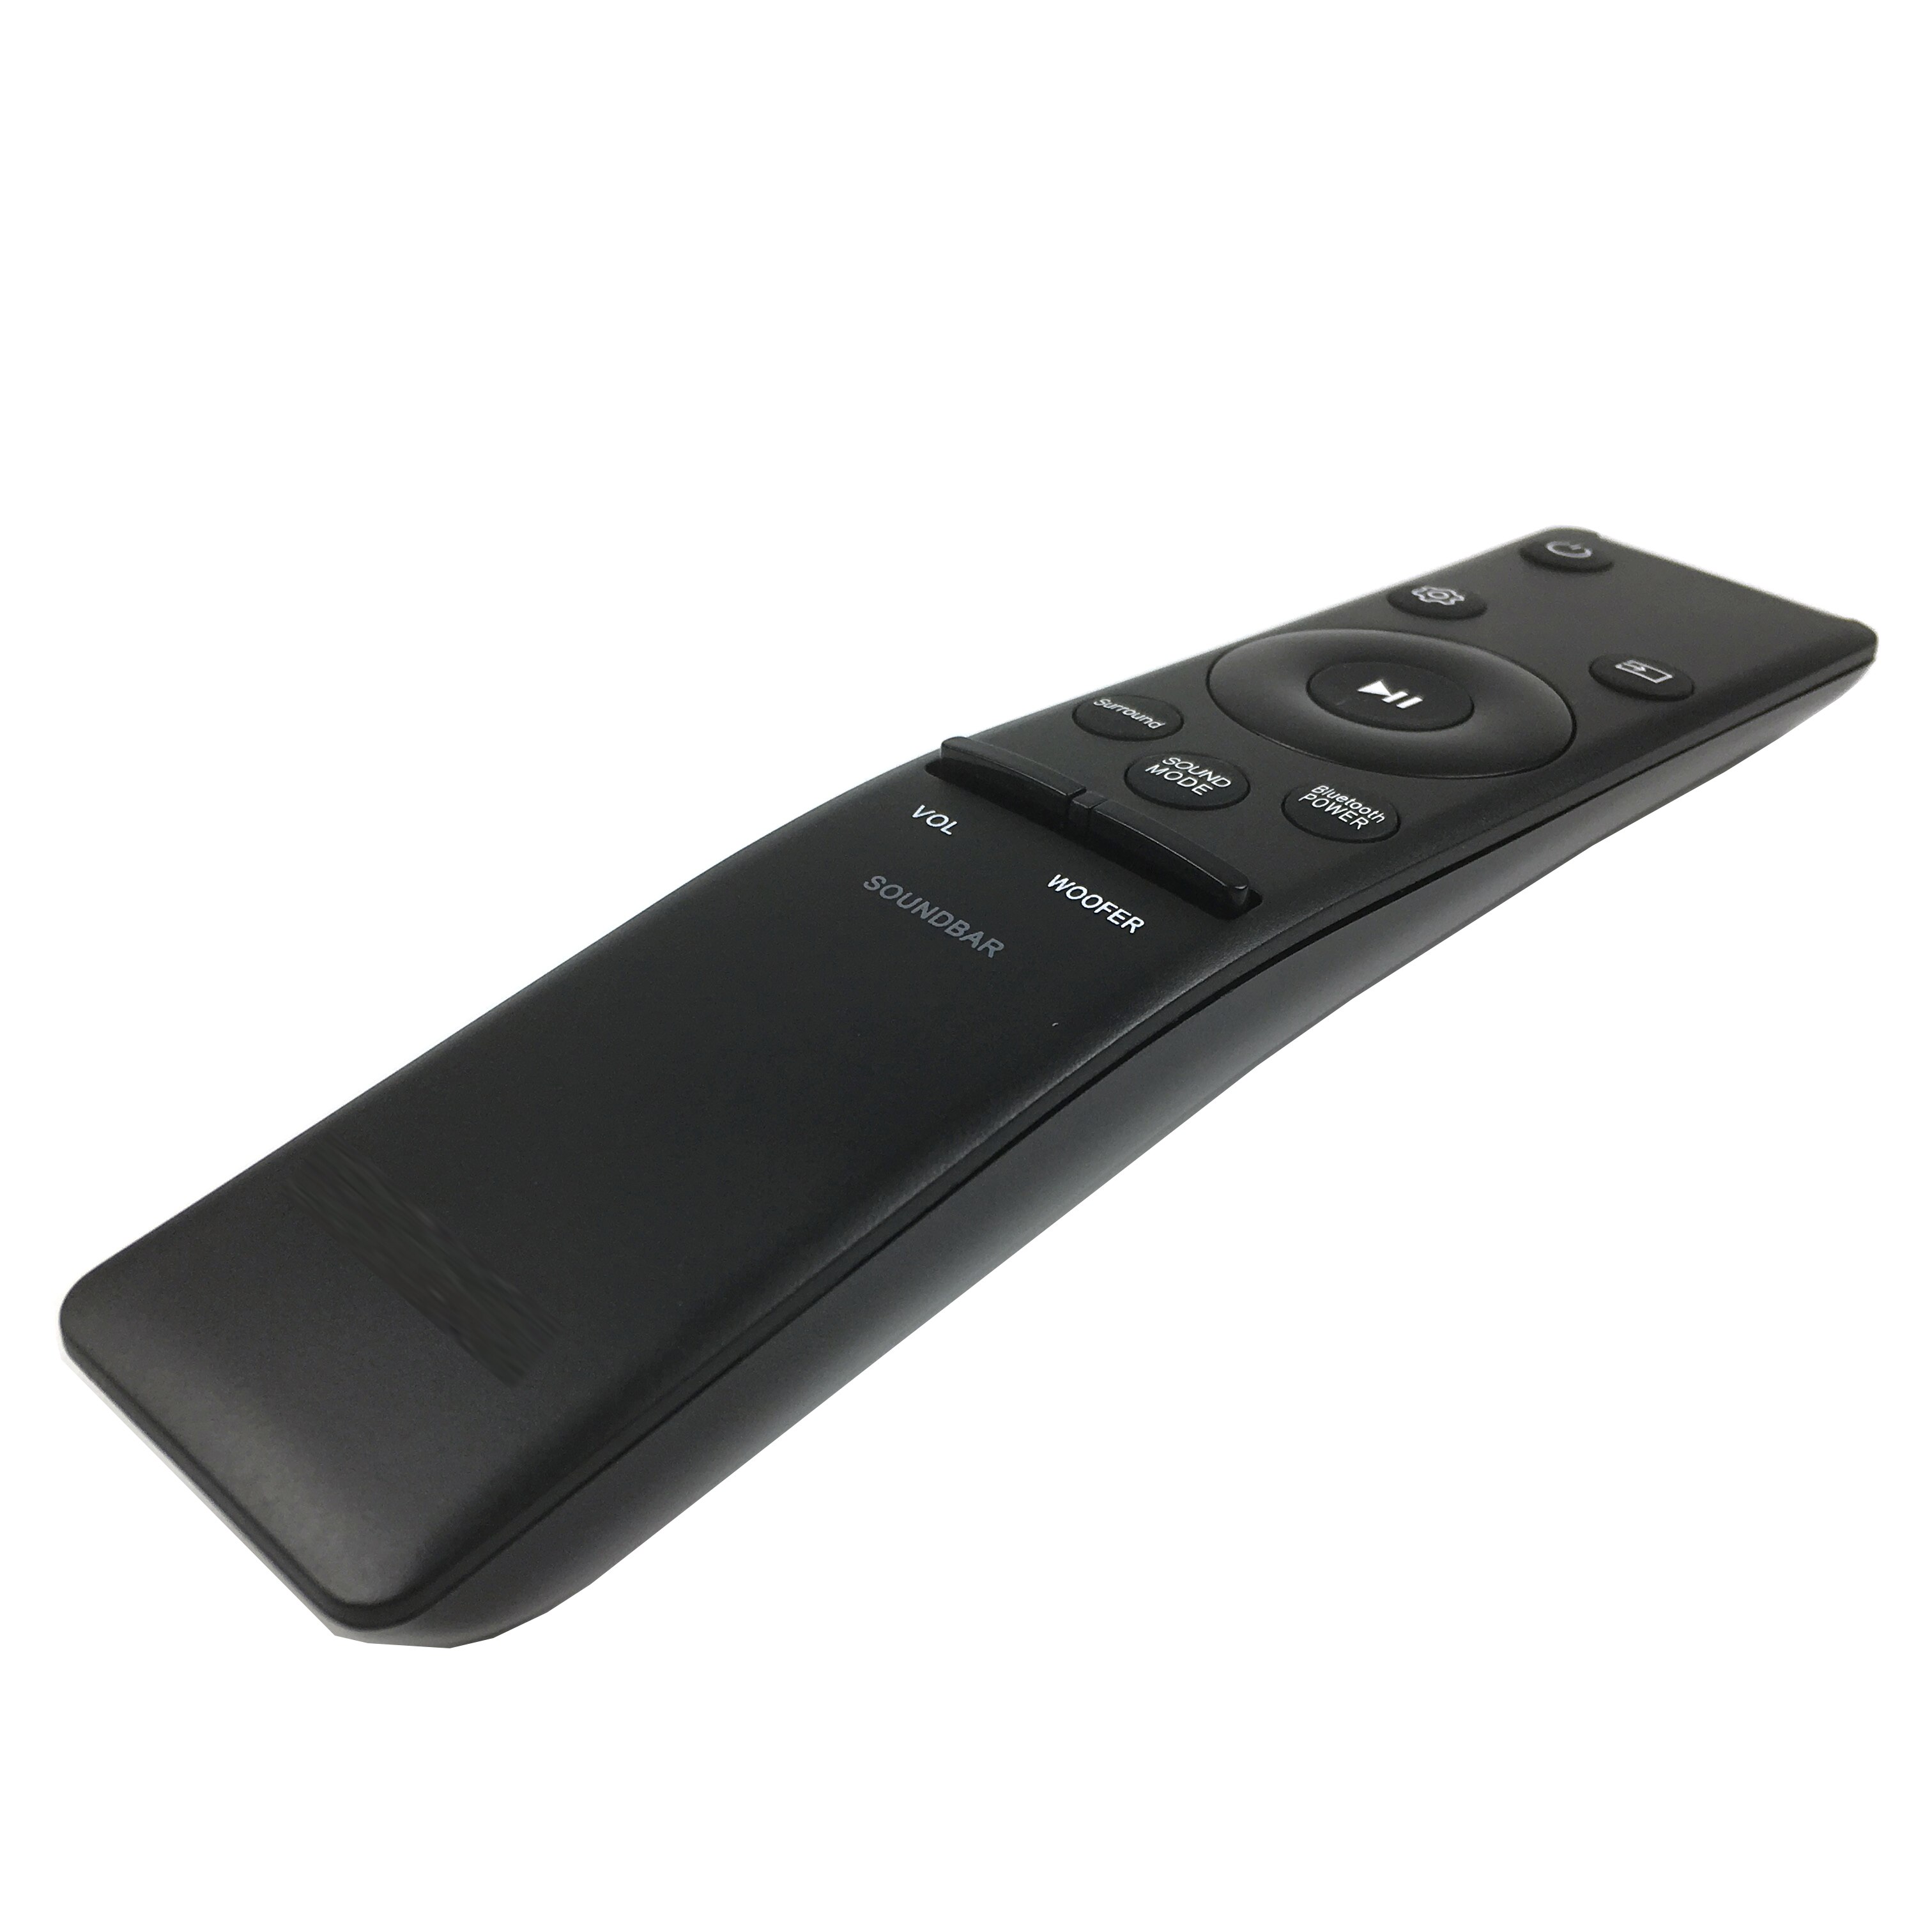 Hot Selling Replacement SOUNDBAR Remote Control For  AH59-02758A HW-M360 HW-M370 HW-M430 HW-M450 HW-M550 HW-M4500